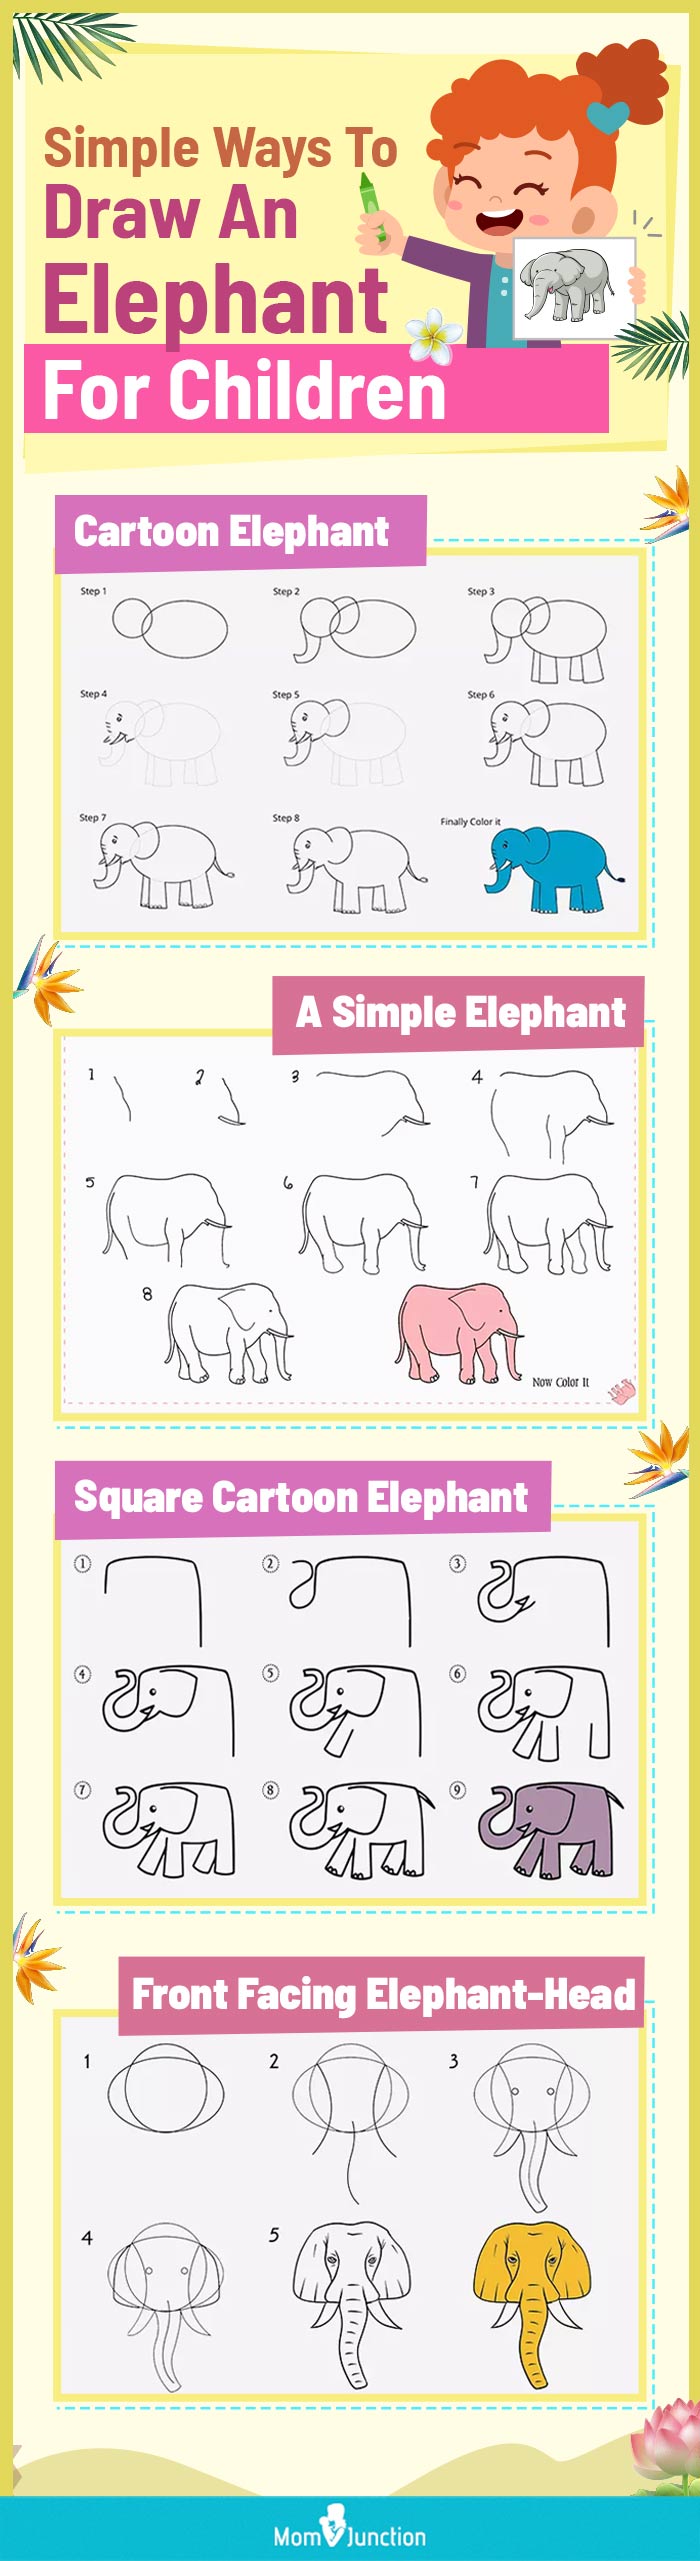 simple ways to draw an elephant for children (infographic)